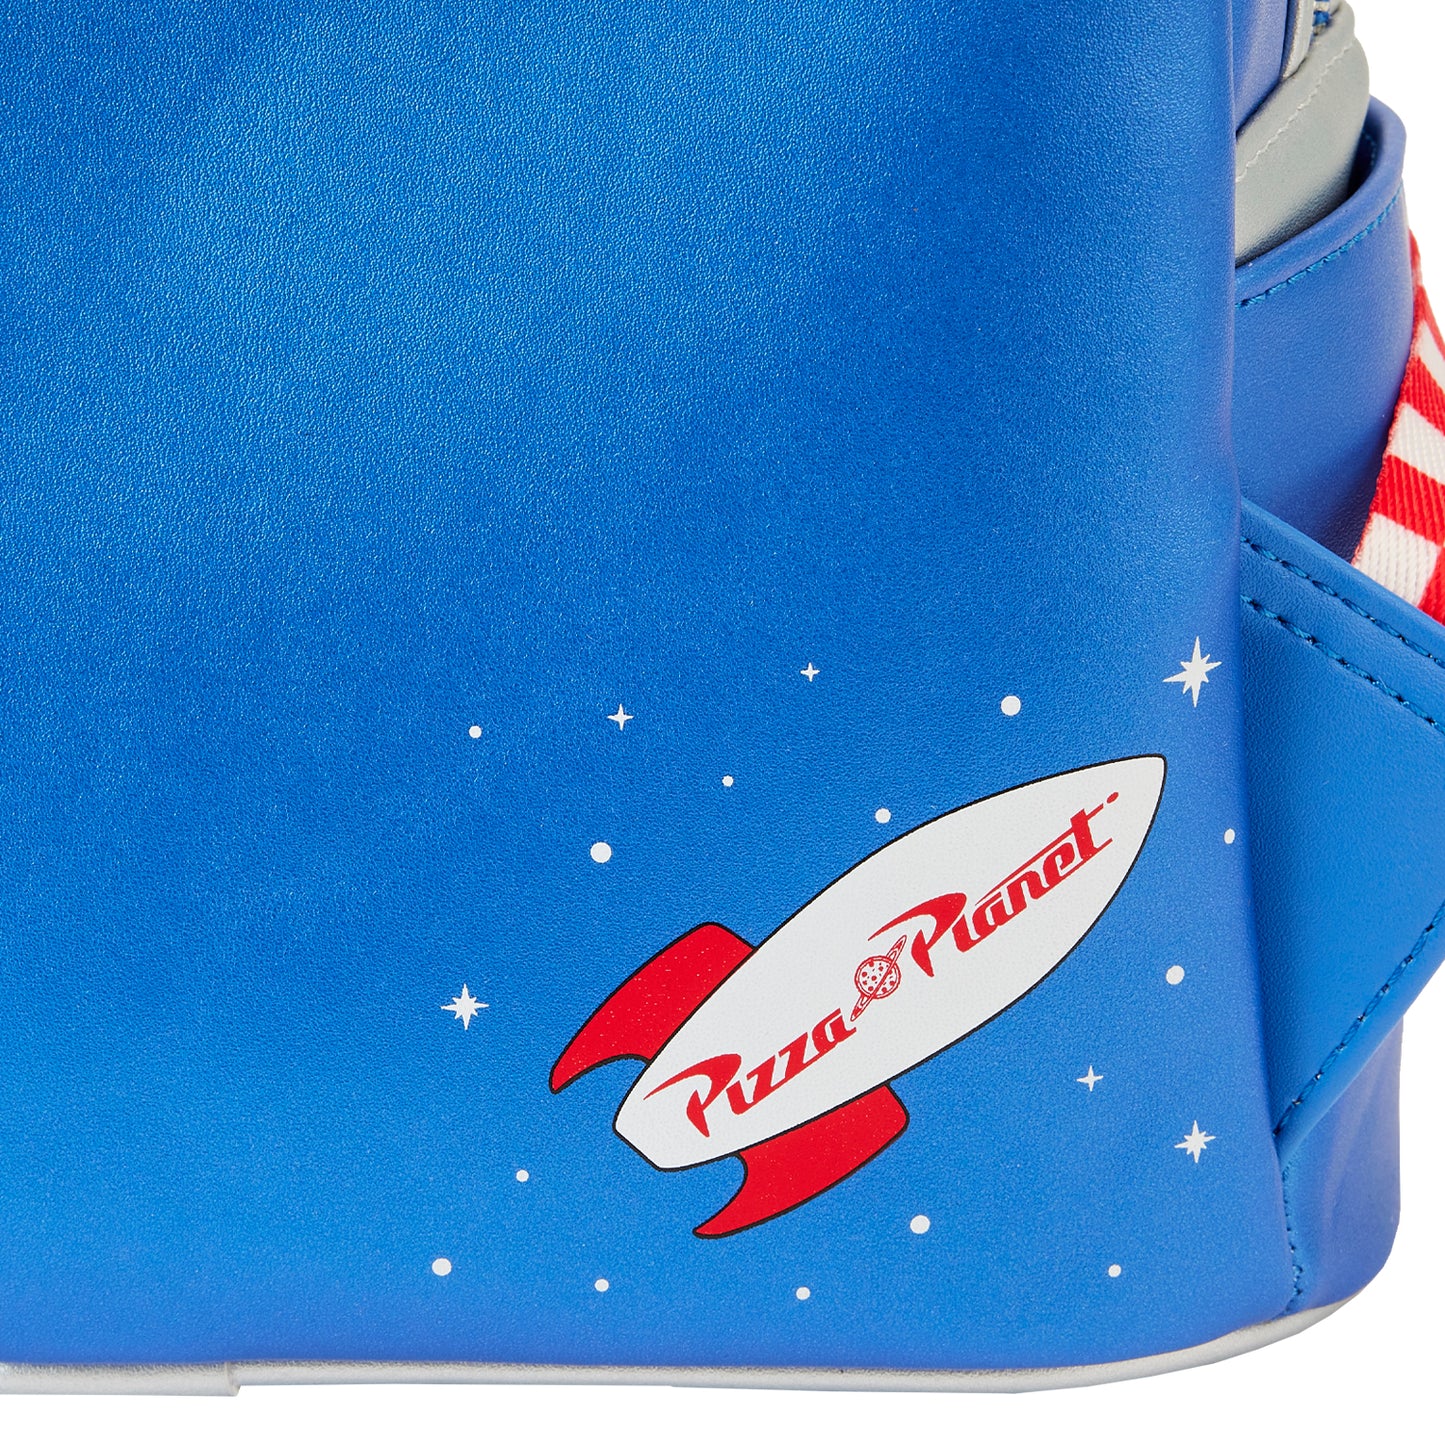 Pizza Planet Space Entry Mini Backpack **PREORDER**